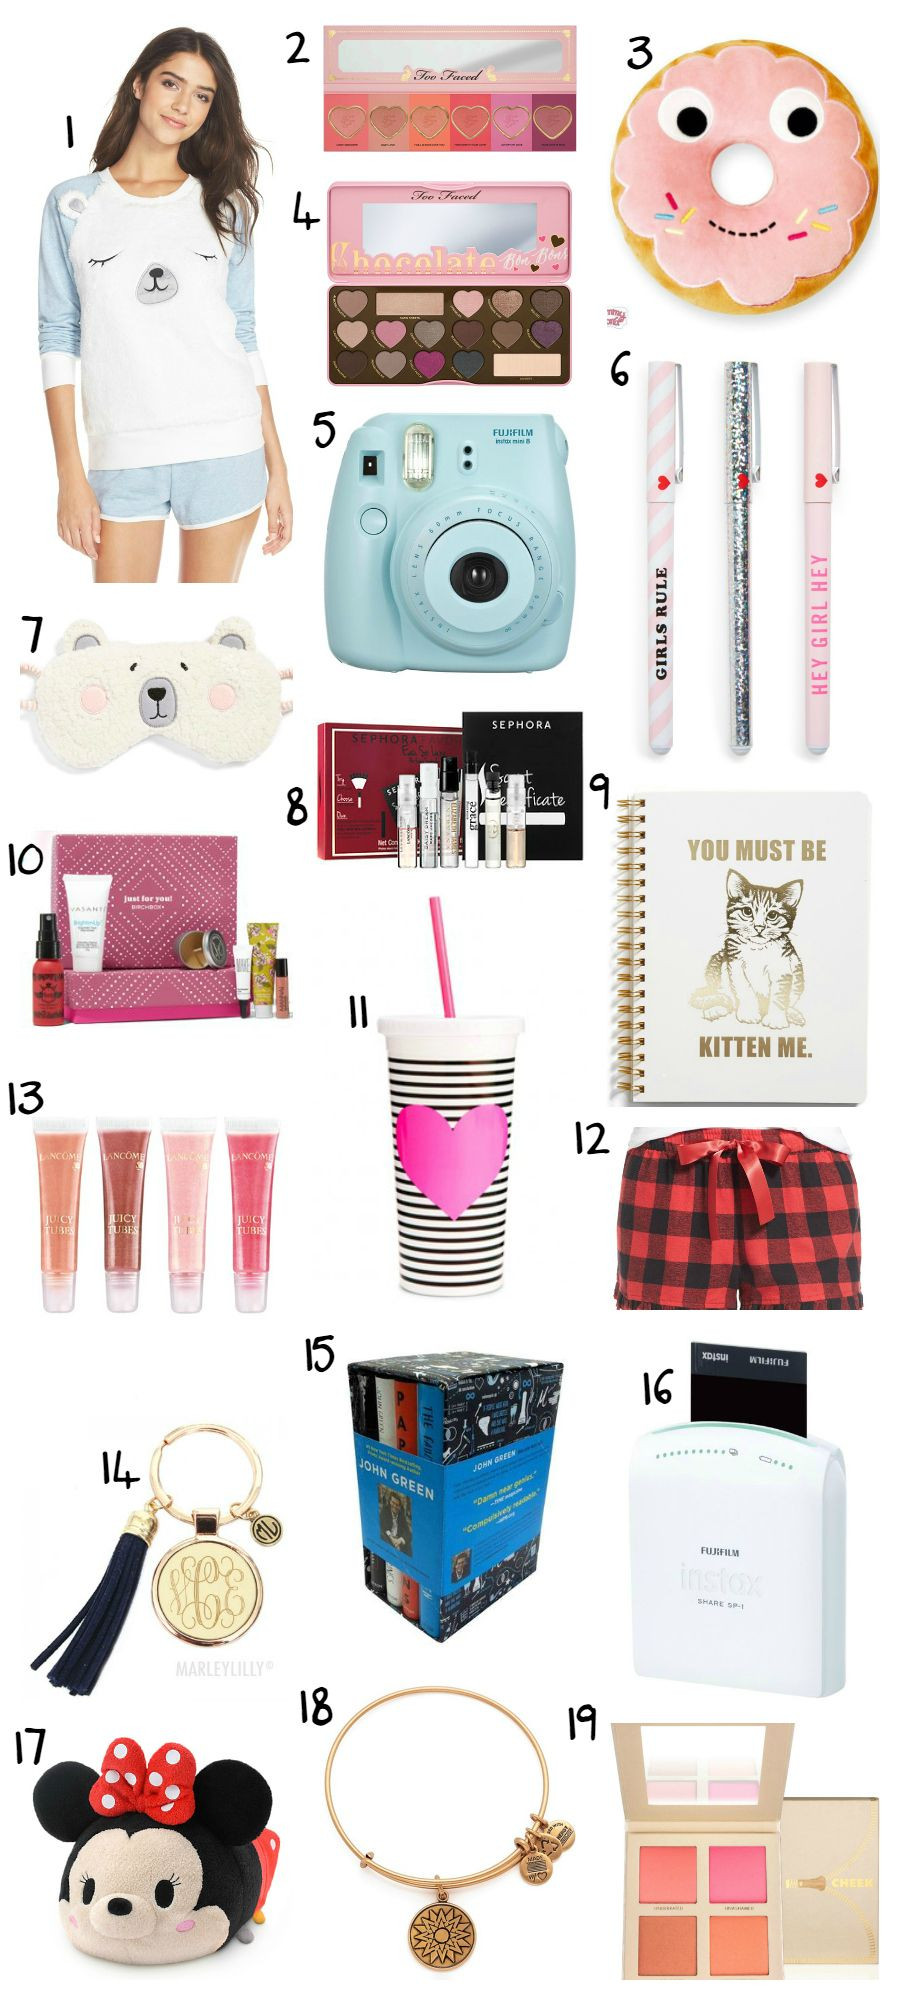 Christmas Gift Ideas For Teenage Girl 2019
 The Best Christmas Gift Ideas for Teens